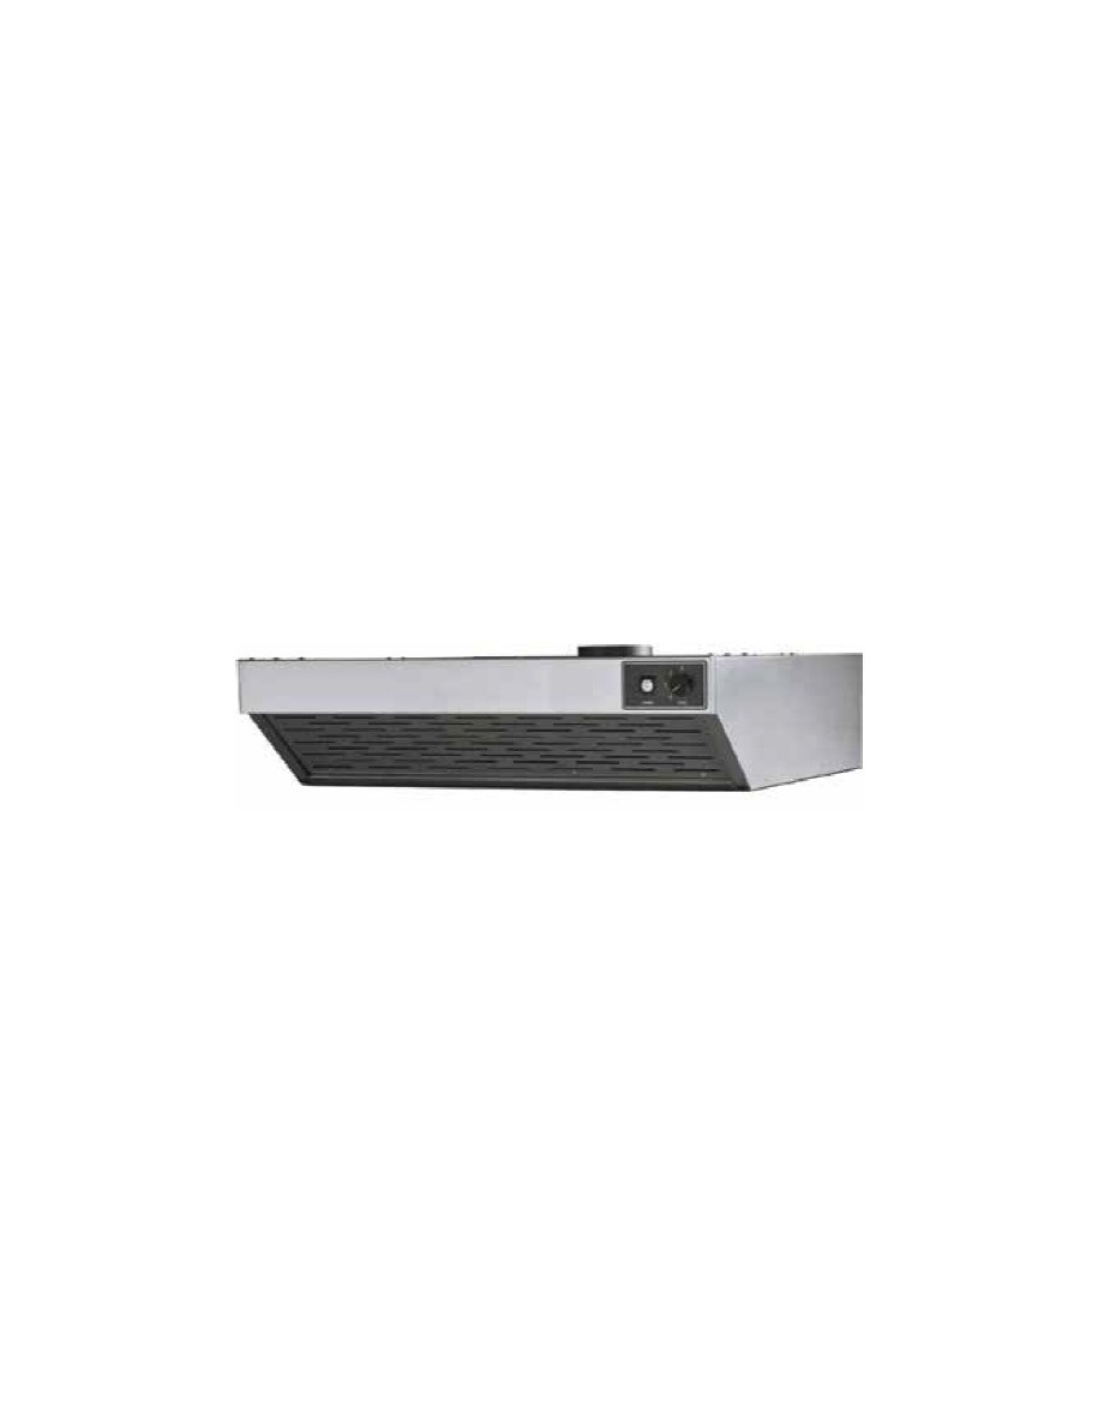 Extractor hood for oven mod. FMEW6/6+6 - Dimensions 115 x 97 x 24 h cm